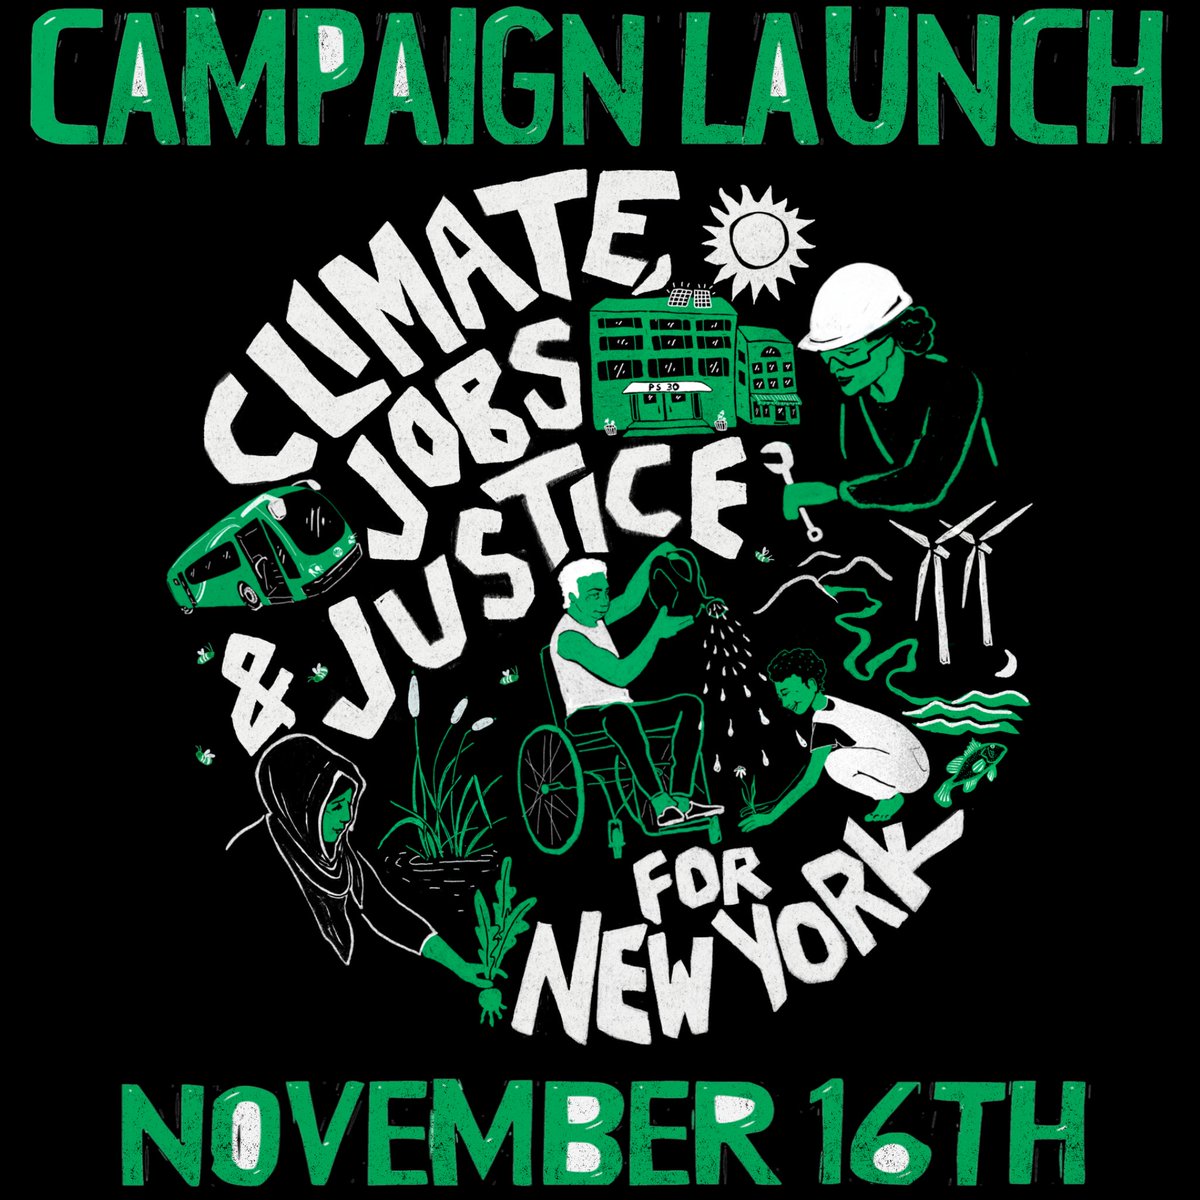 UUP is joining 300+ NY orgs to support the Climate, Jobs, and Justice Campaign Launch today to fight for a greener, more sustainable future for all New Yorkers! 

#PassTheCJJP #ClimateJustice4NY #ClimateJobsJustice